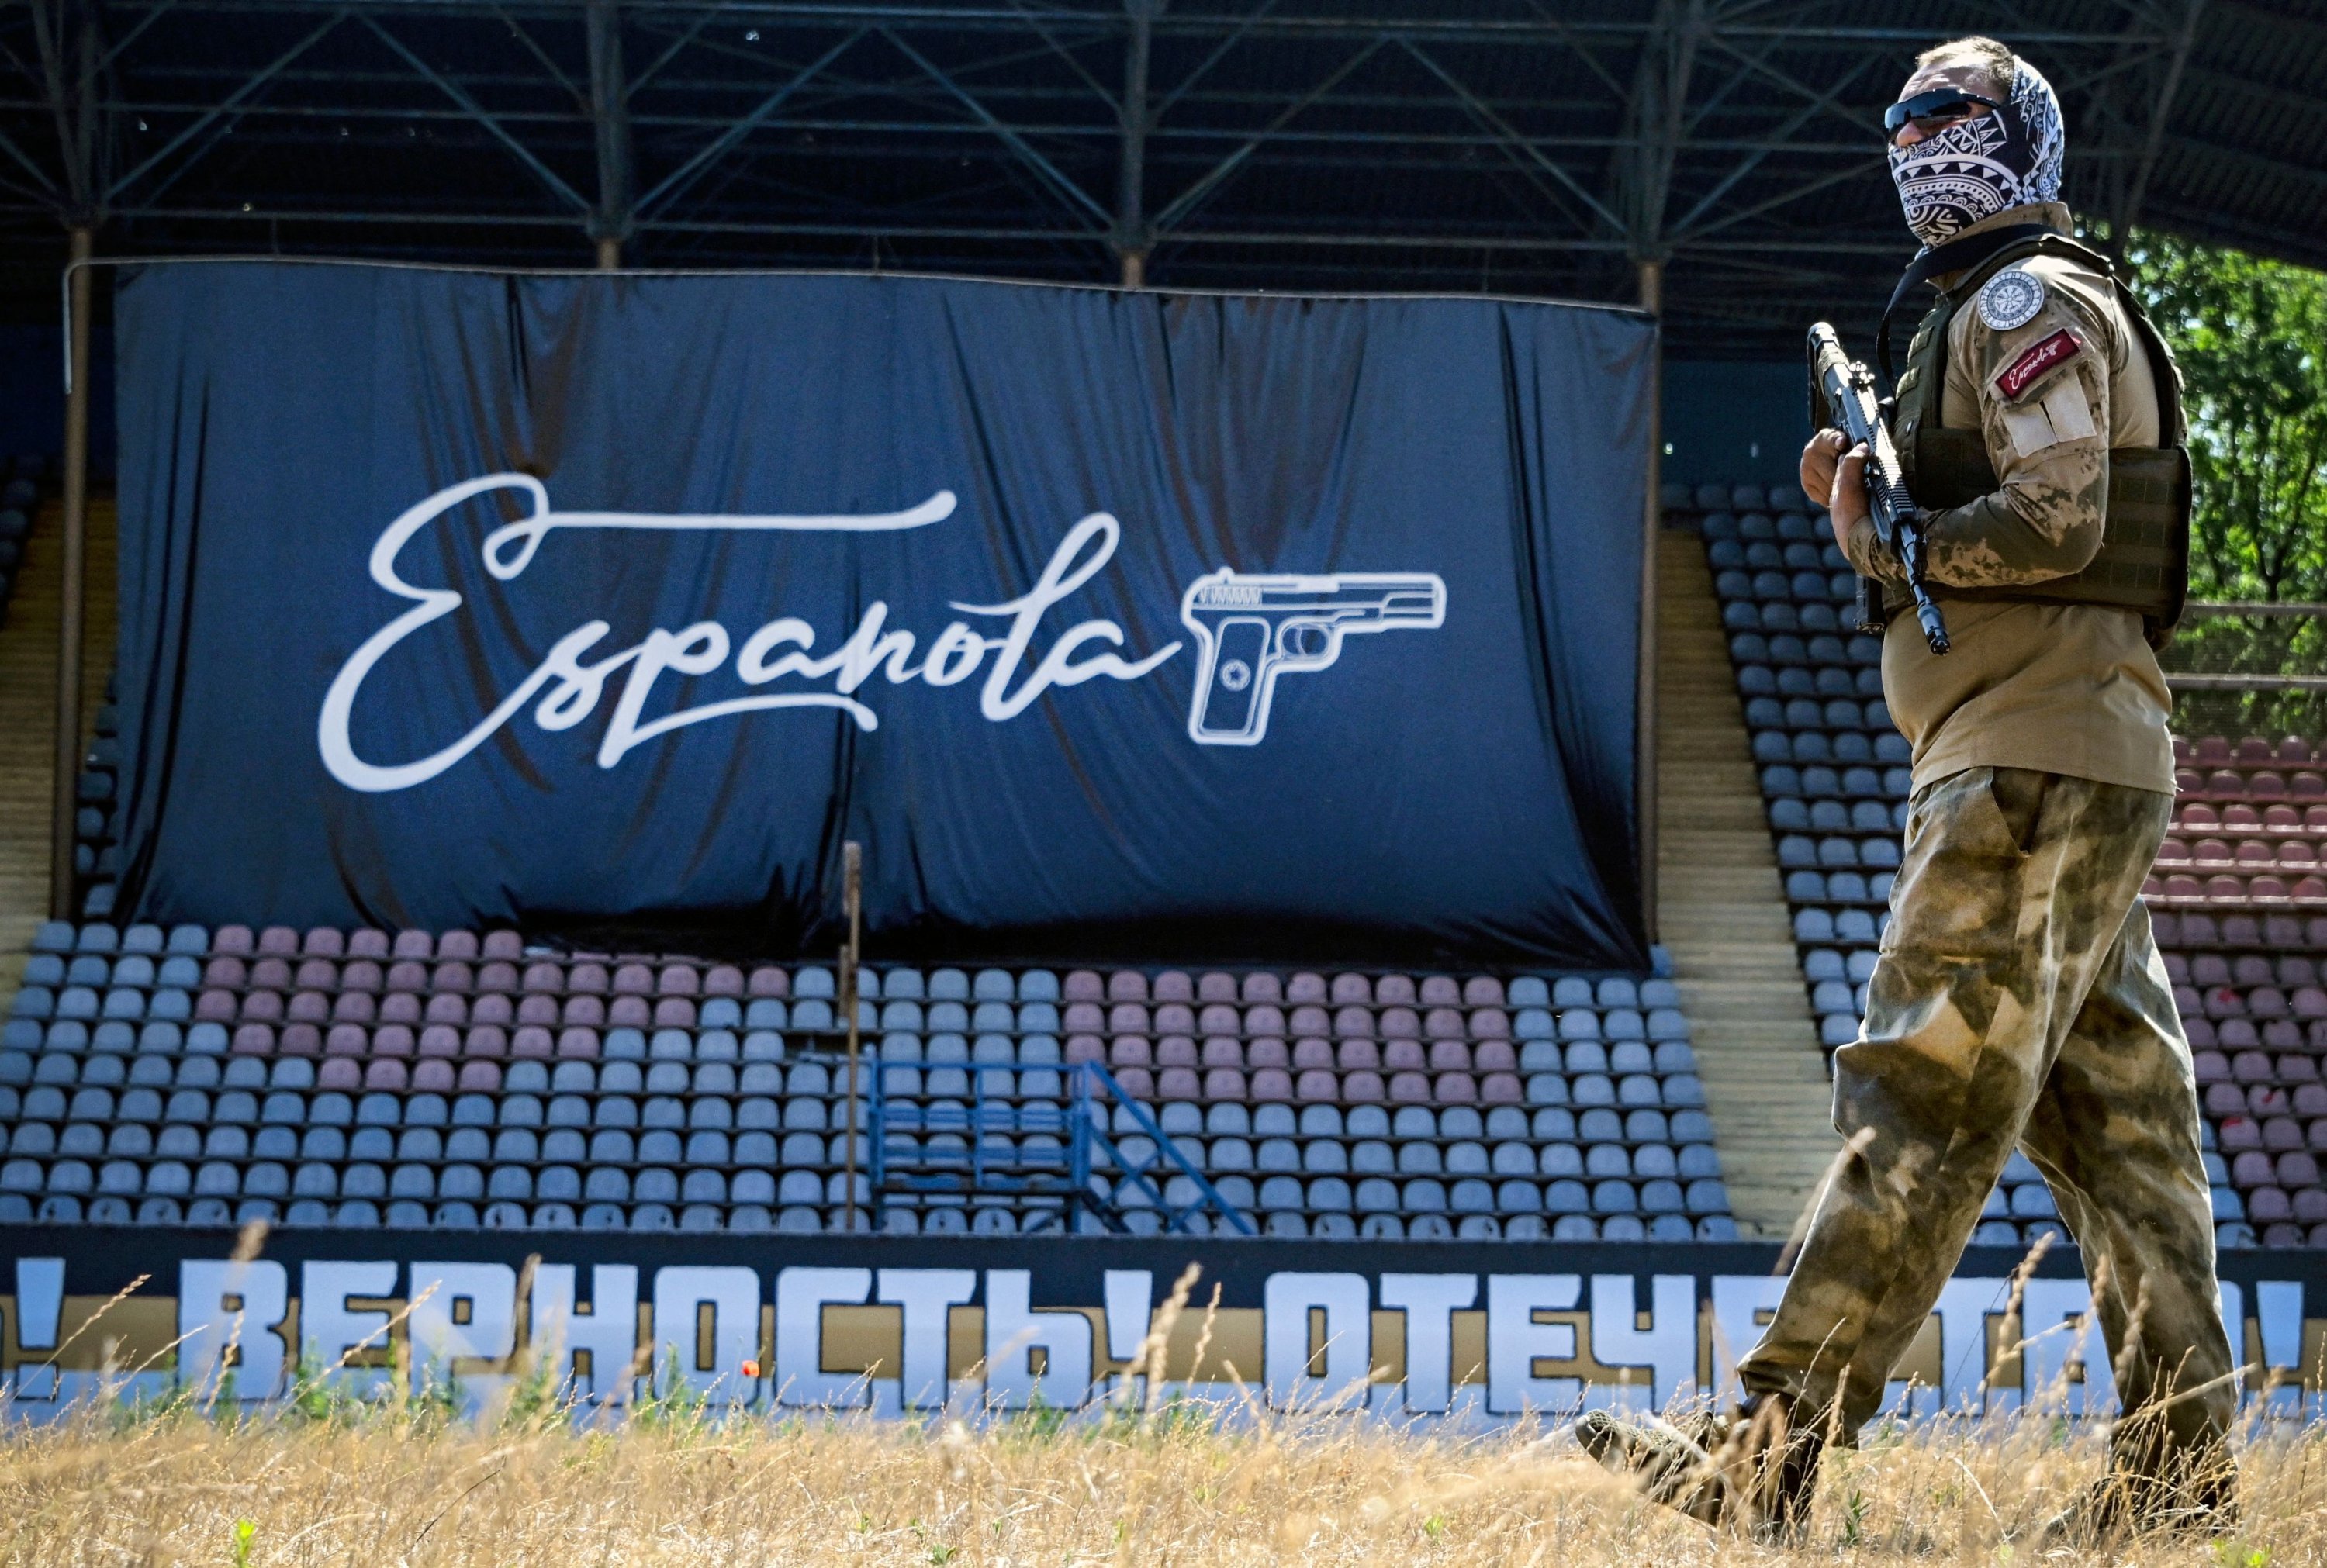 Battle On Pitch Russian Football Ultras Take Arms In Mariupol Daily Sabah